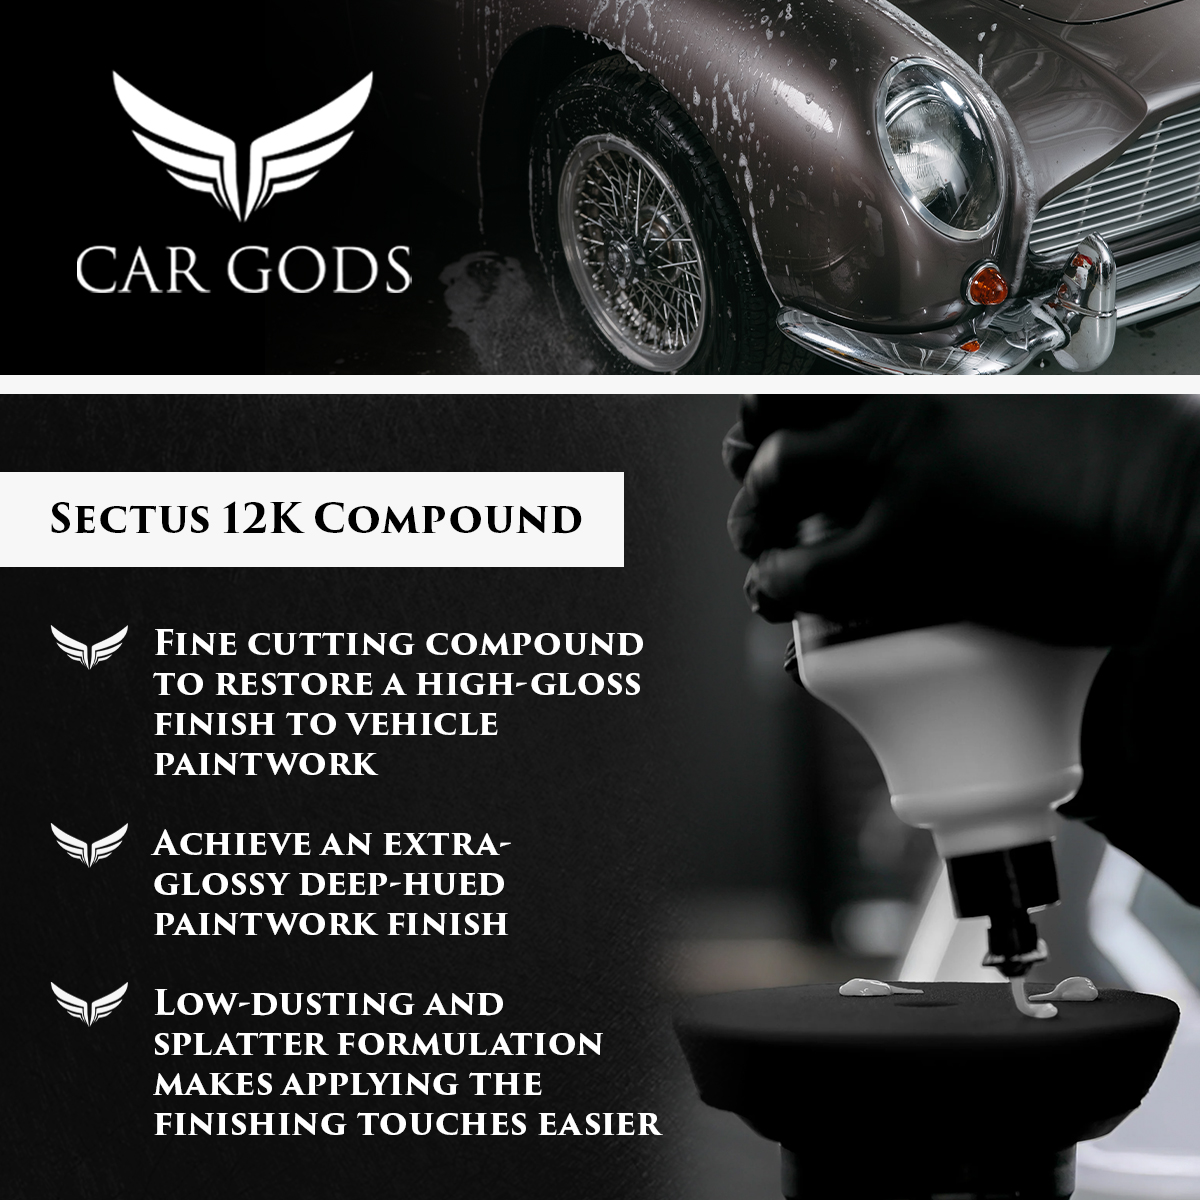 Car Gods Sectus 12K Compound. Fine cutting compound to restore a high-gloss, deep-hued finish. Recommended for use as a final stage polishing compound, the low-dusting, silicone-free formulation makes it easier to apply finishing touches.